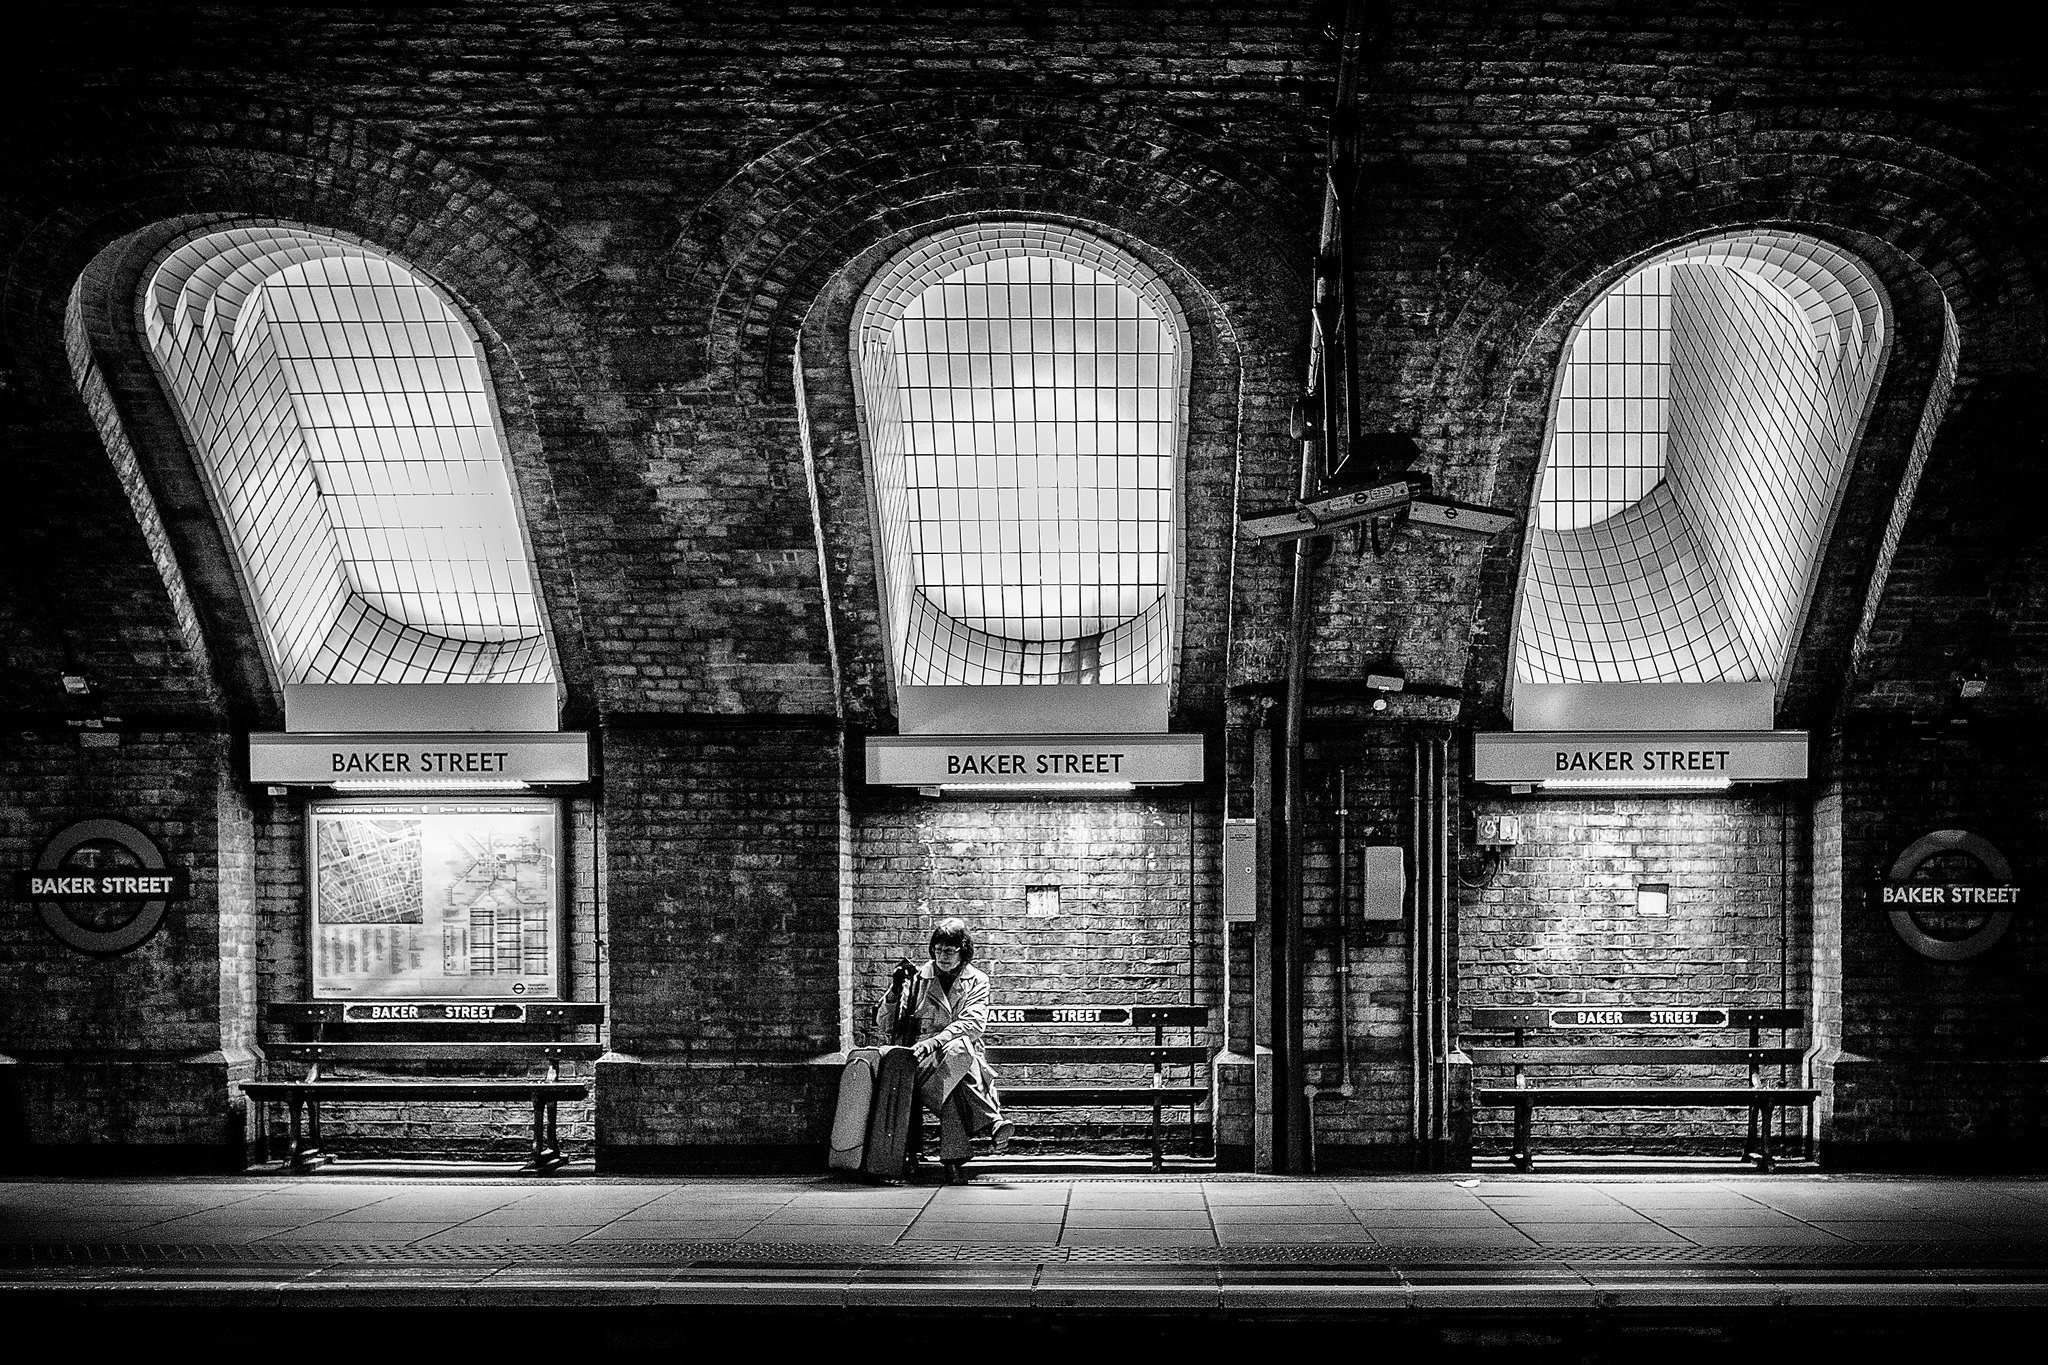 Baker Street, by Dragan of DB Photography